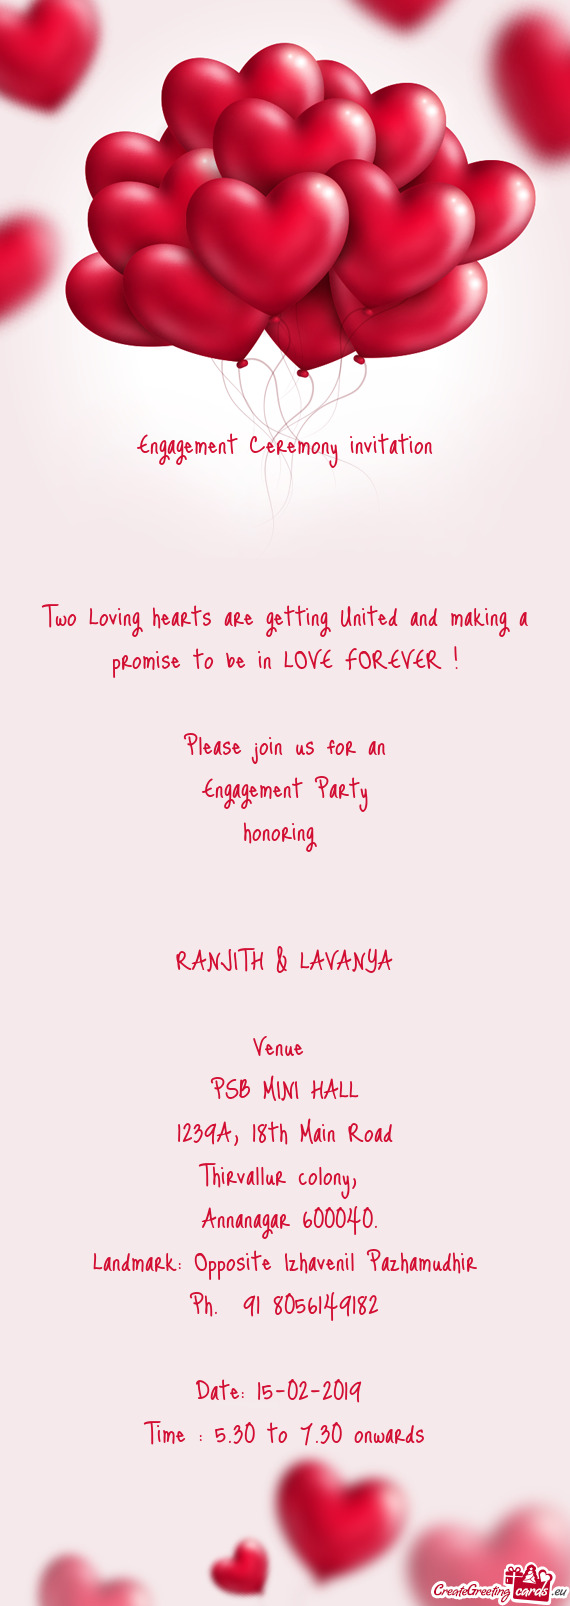 Engagement Ceremony invitation
 
 
 
 Two Loving hearts are getting United and making a promise to